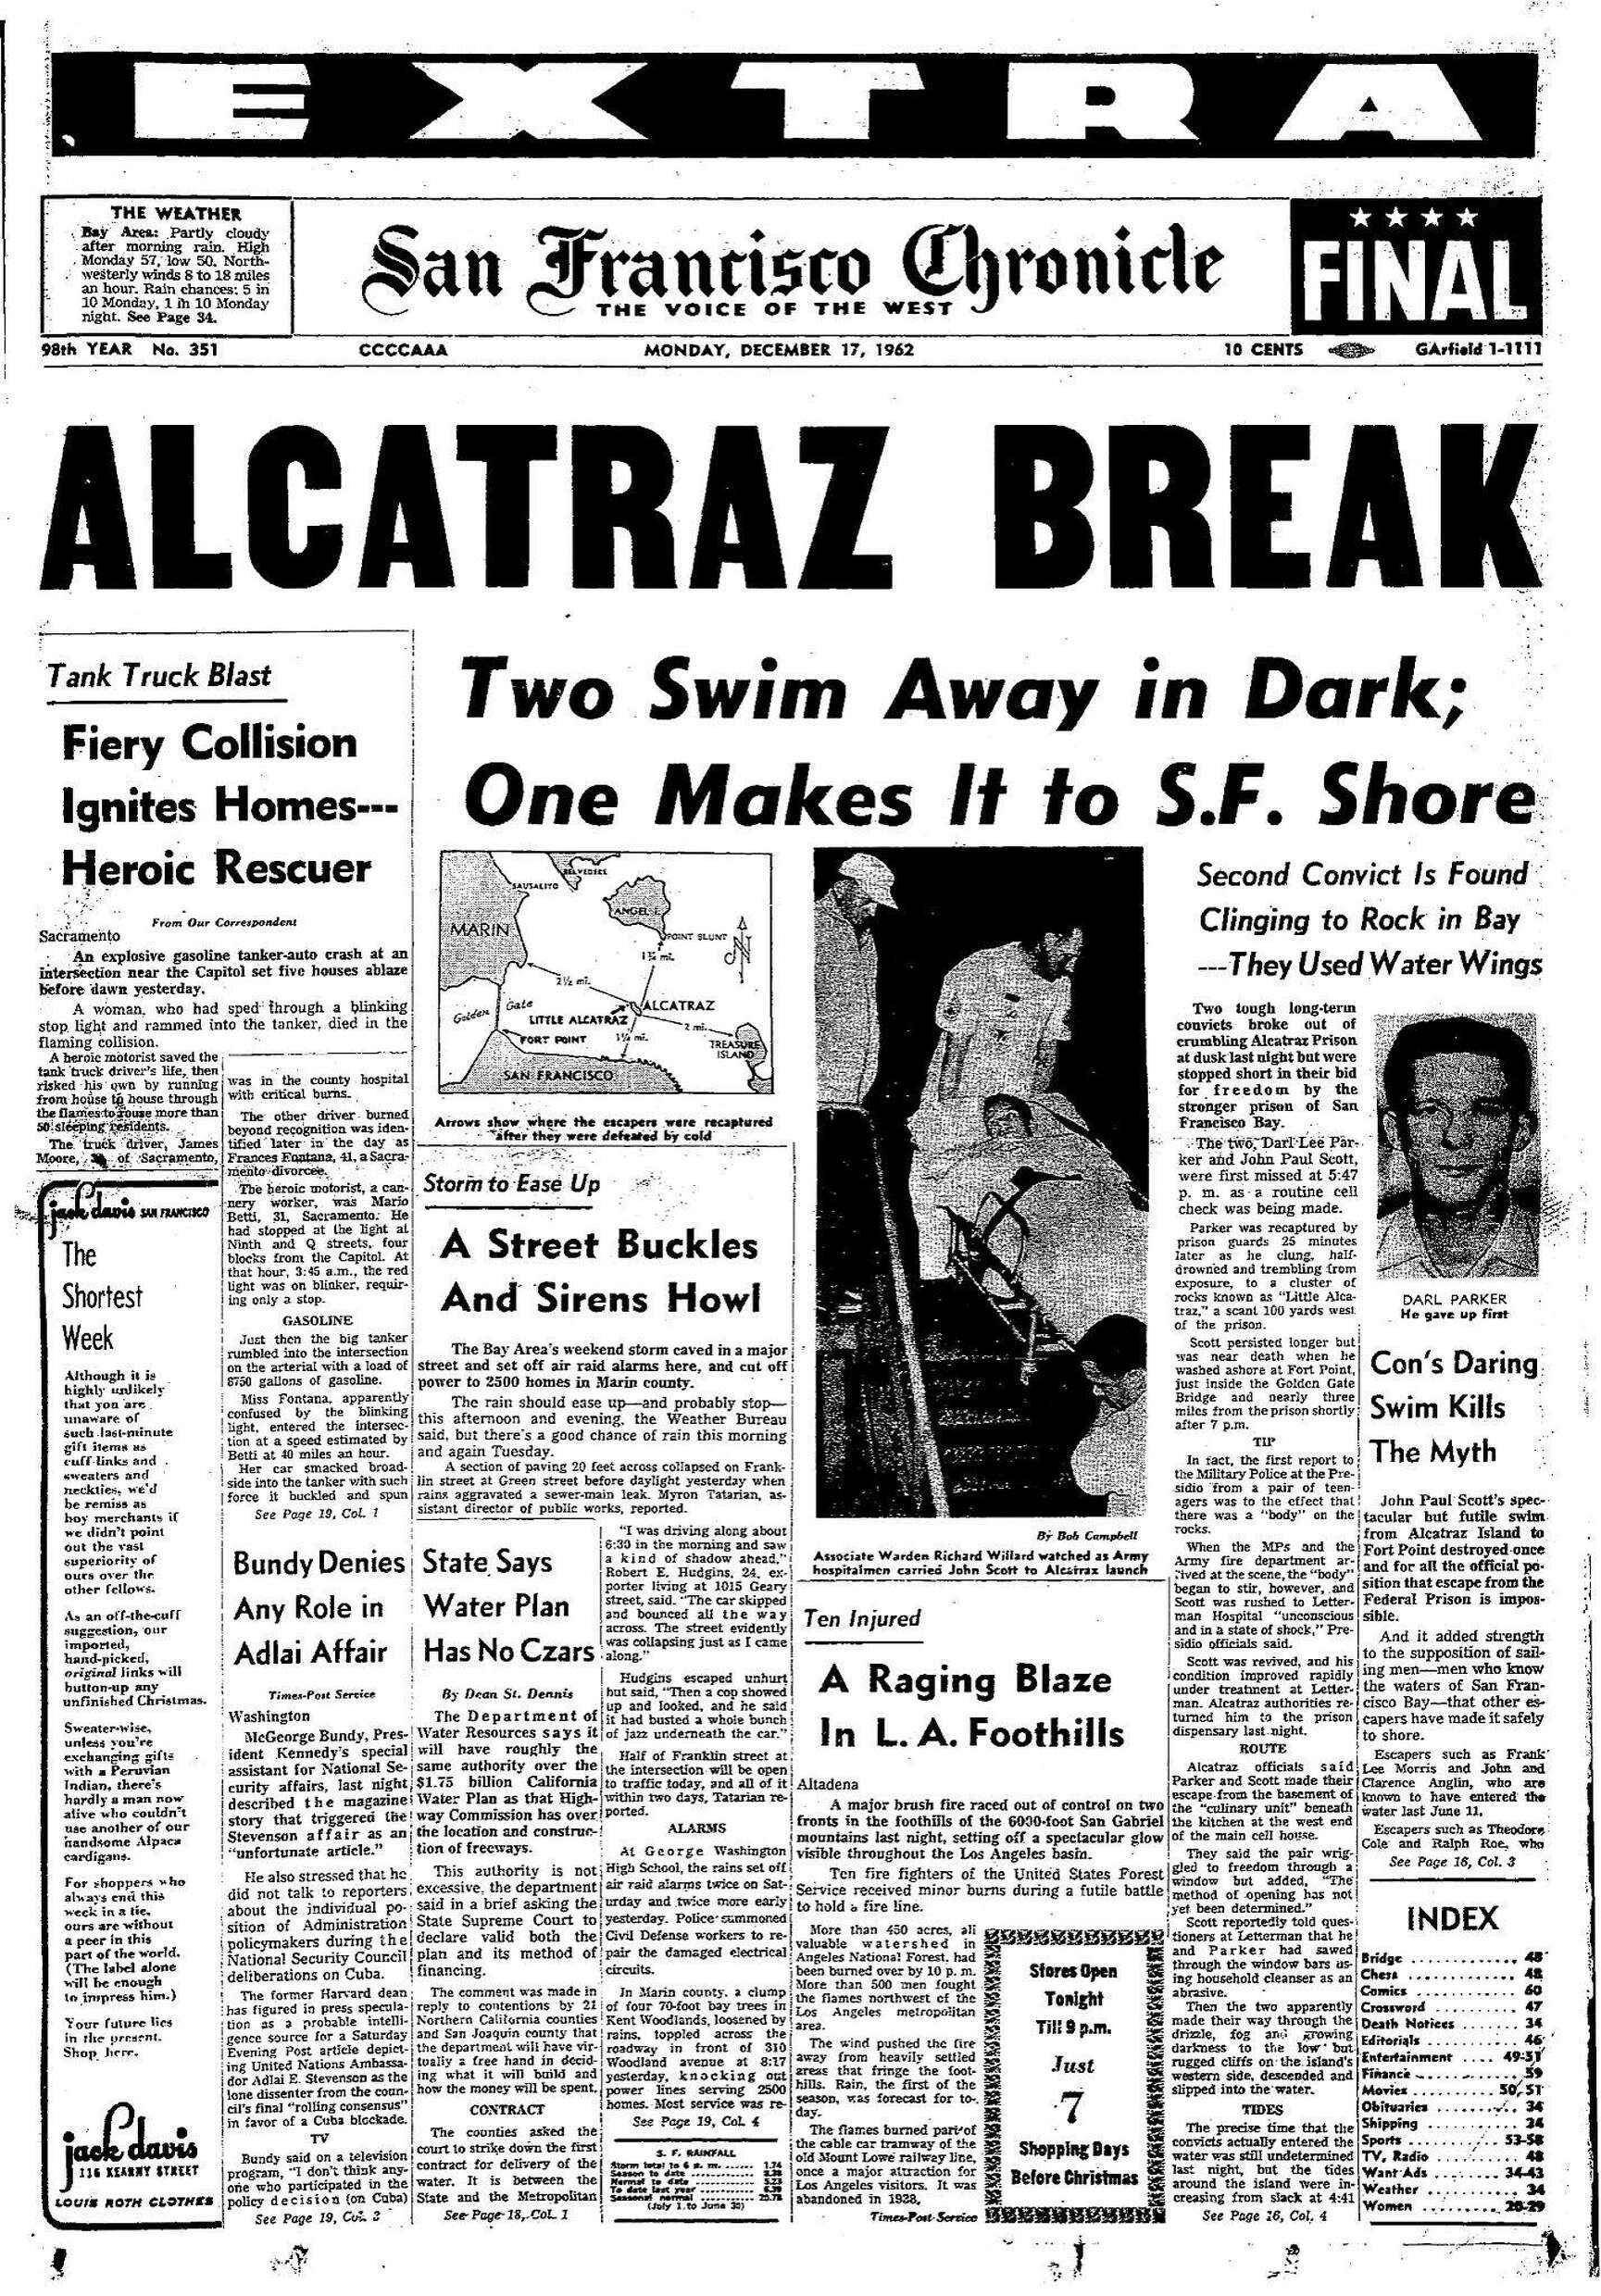 Chronicle Covers: The final escape from Alcatraz - SFChronicle.com